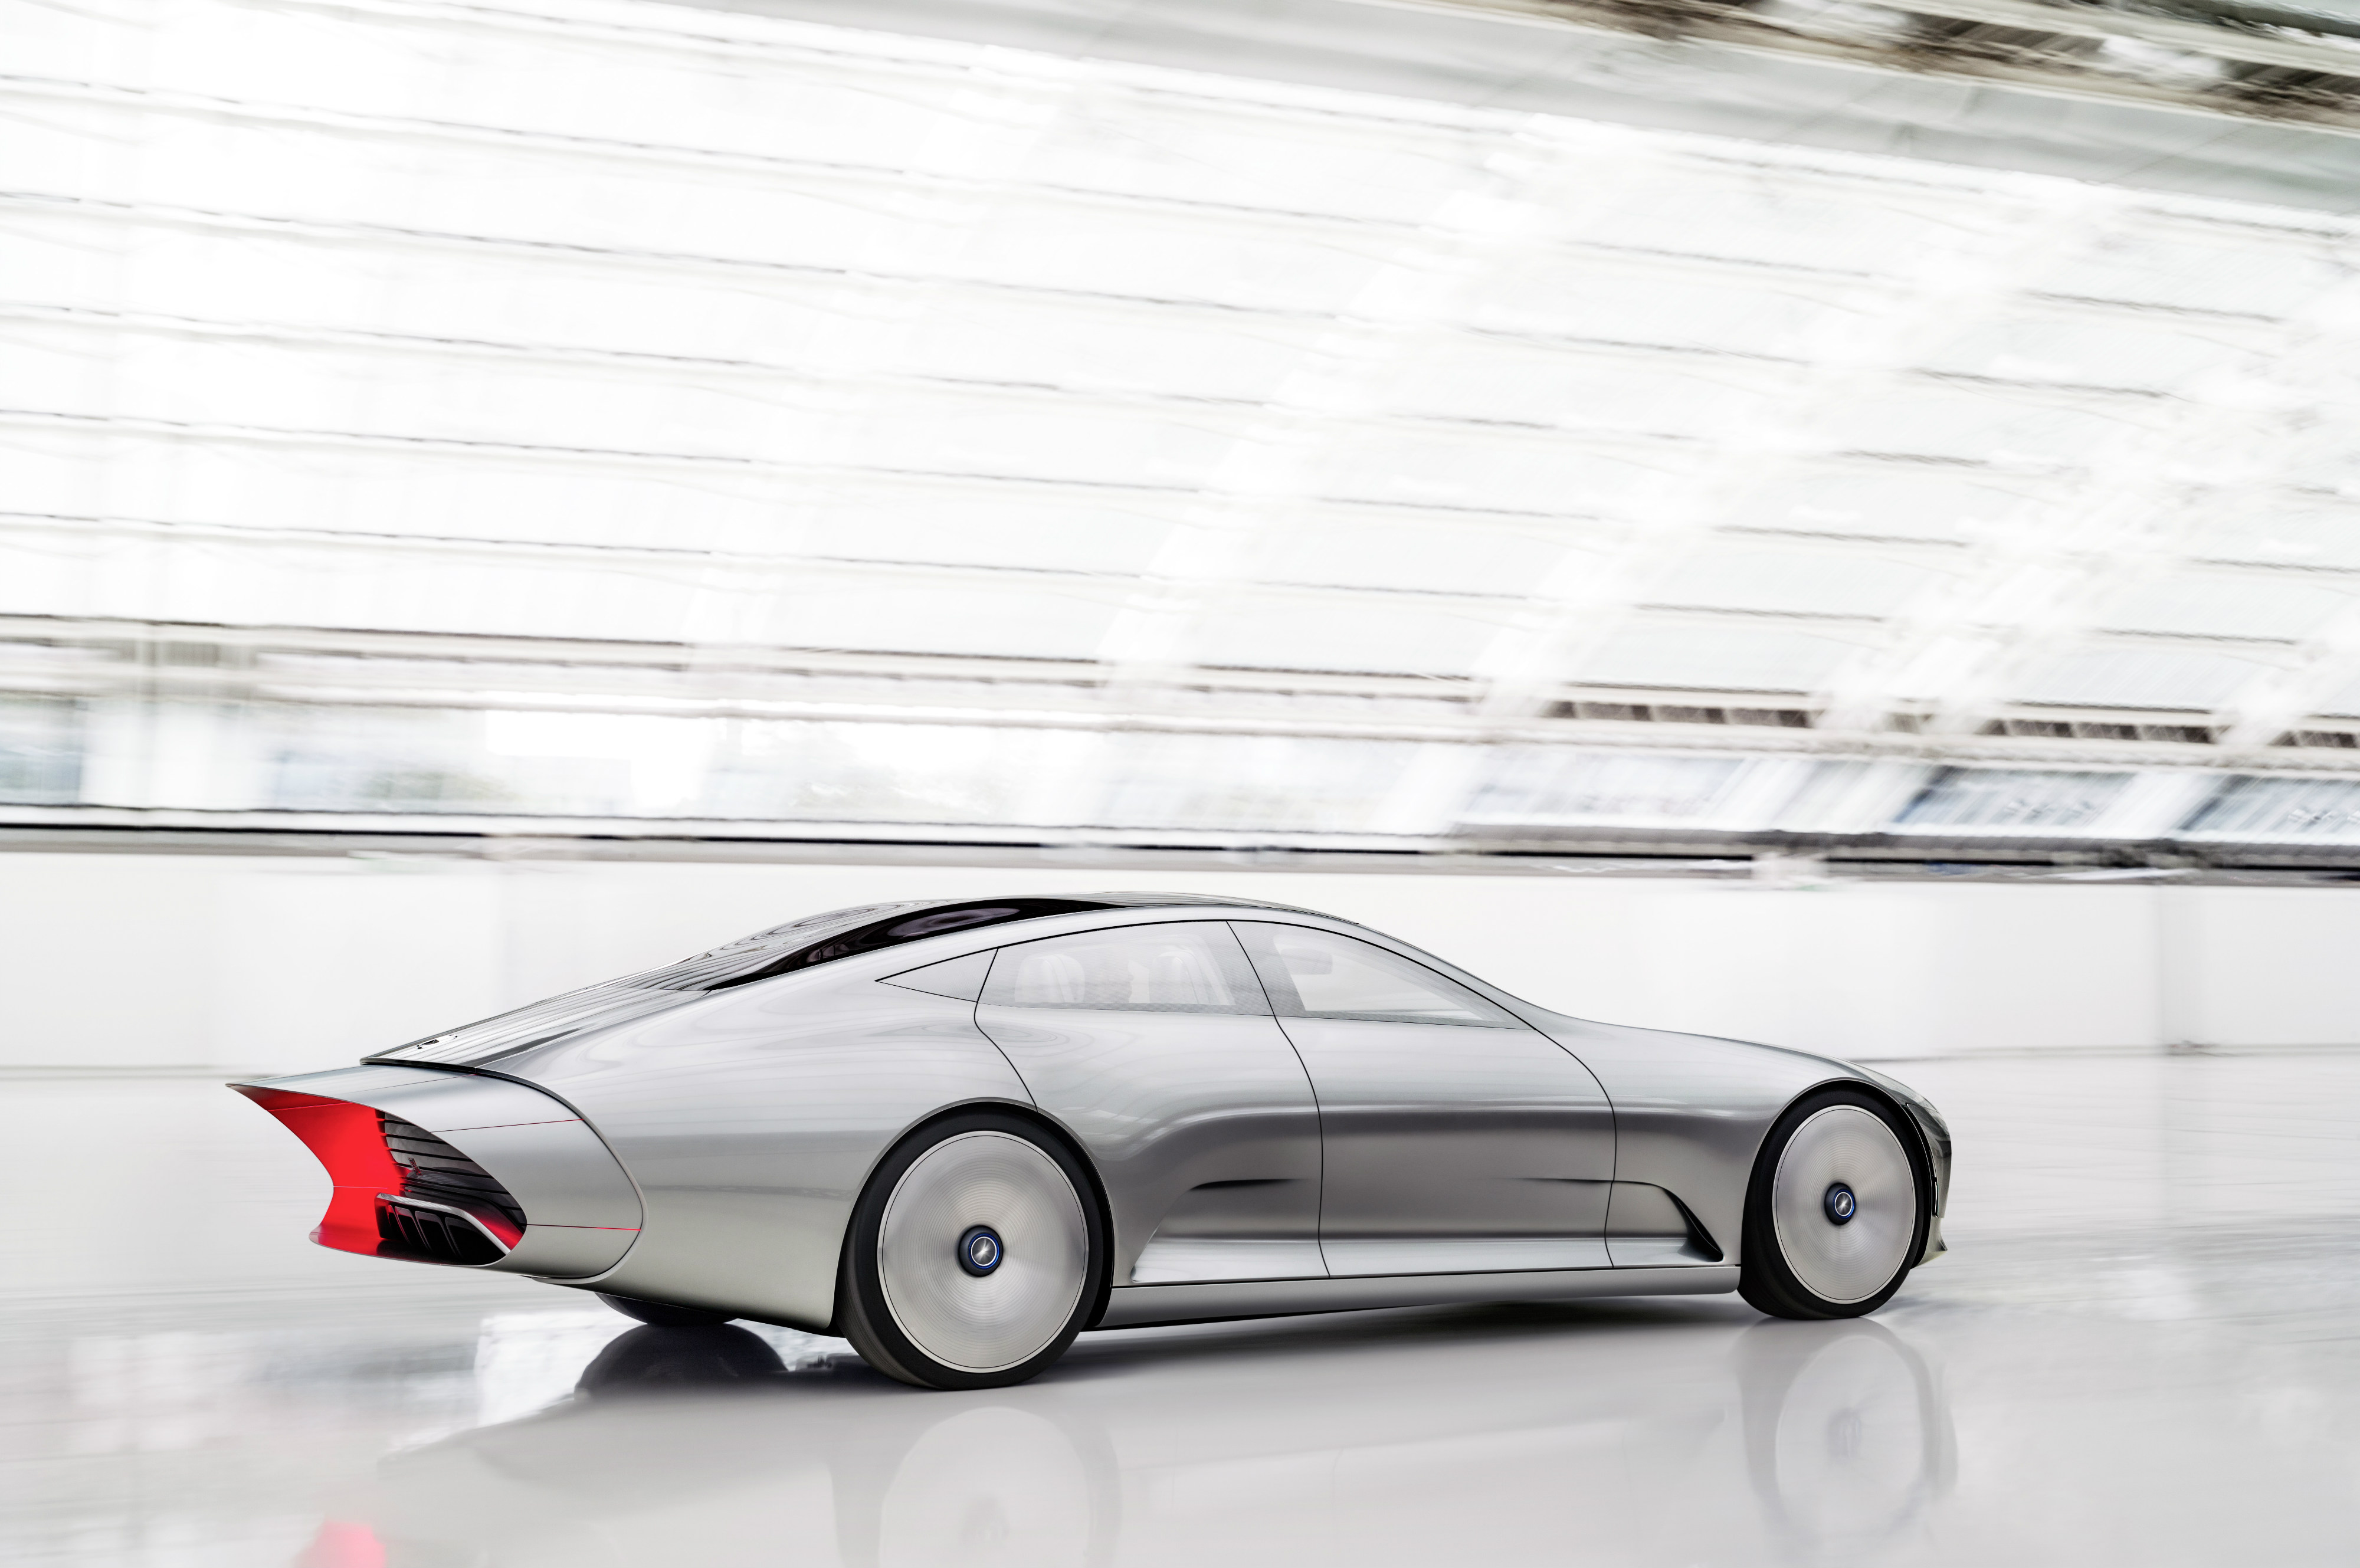 Mercedes Concept IAA has an extendable tail section